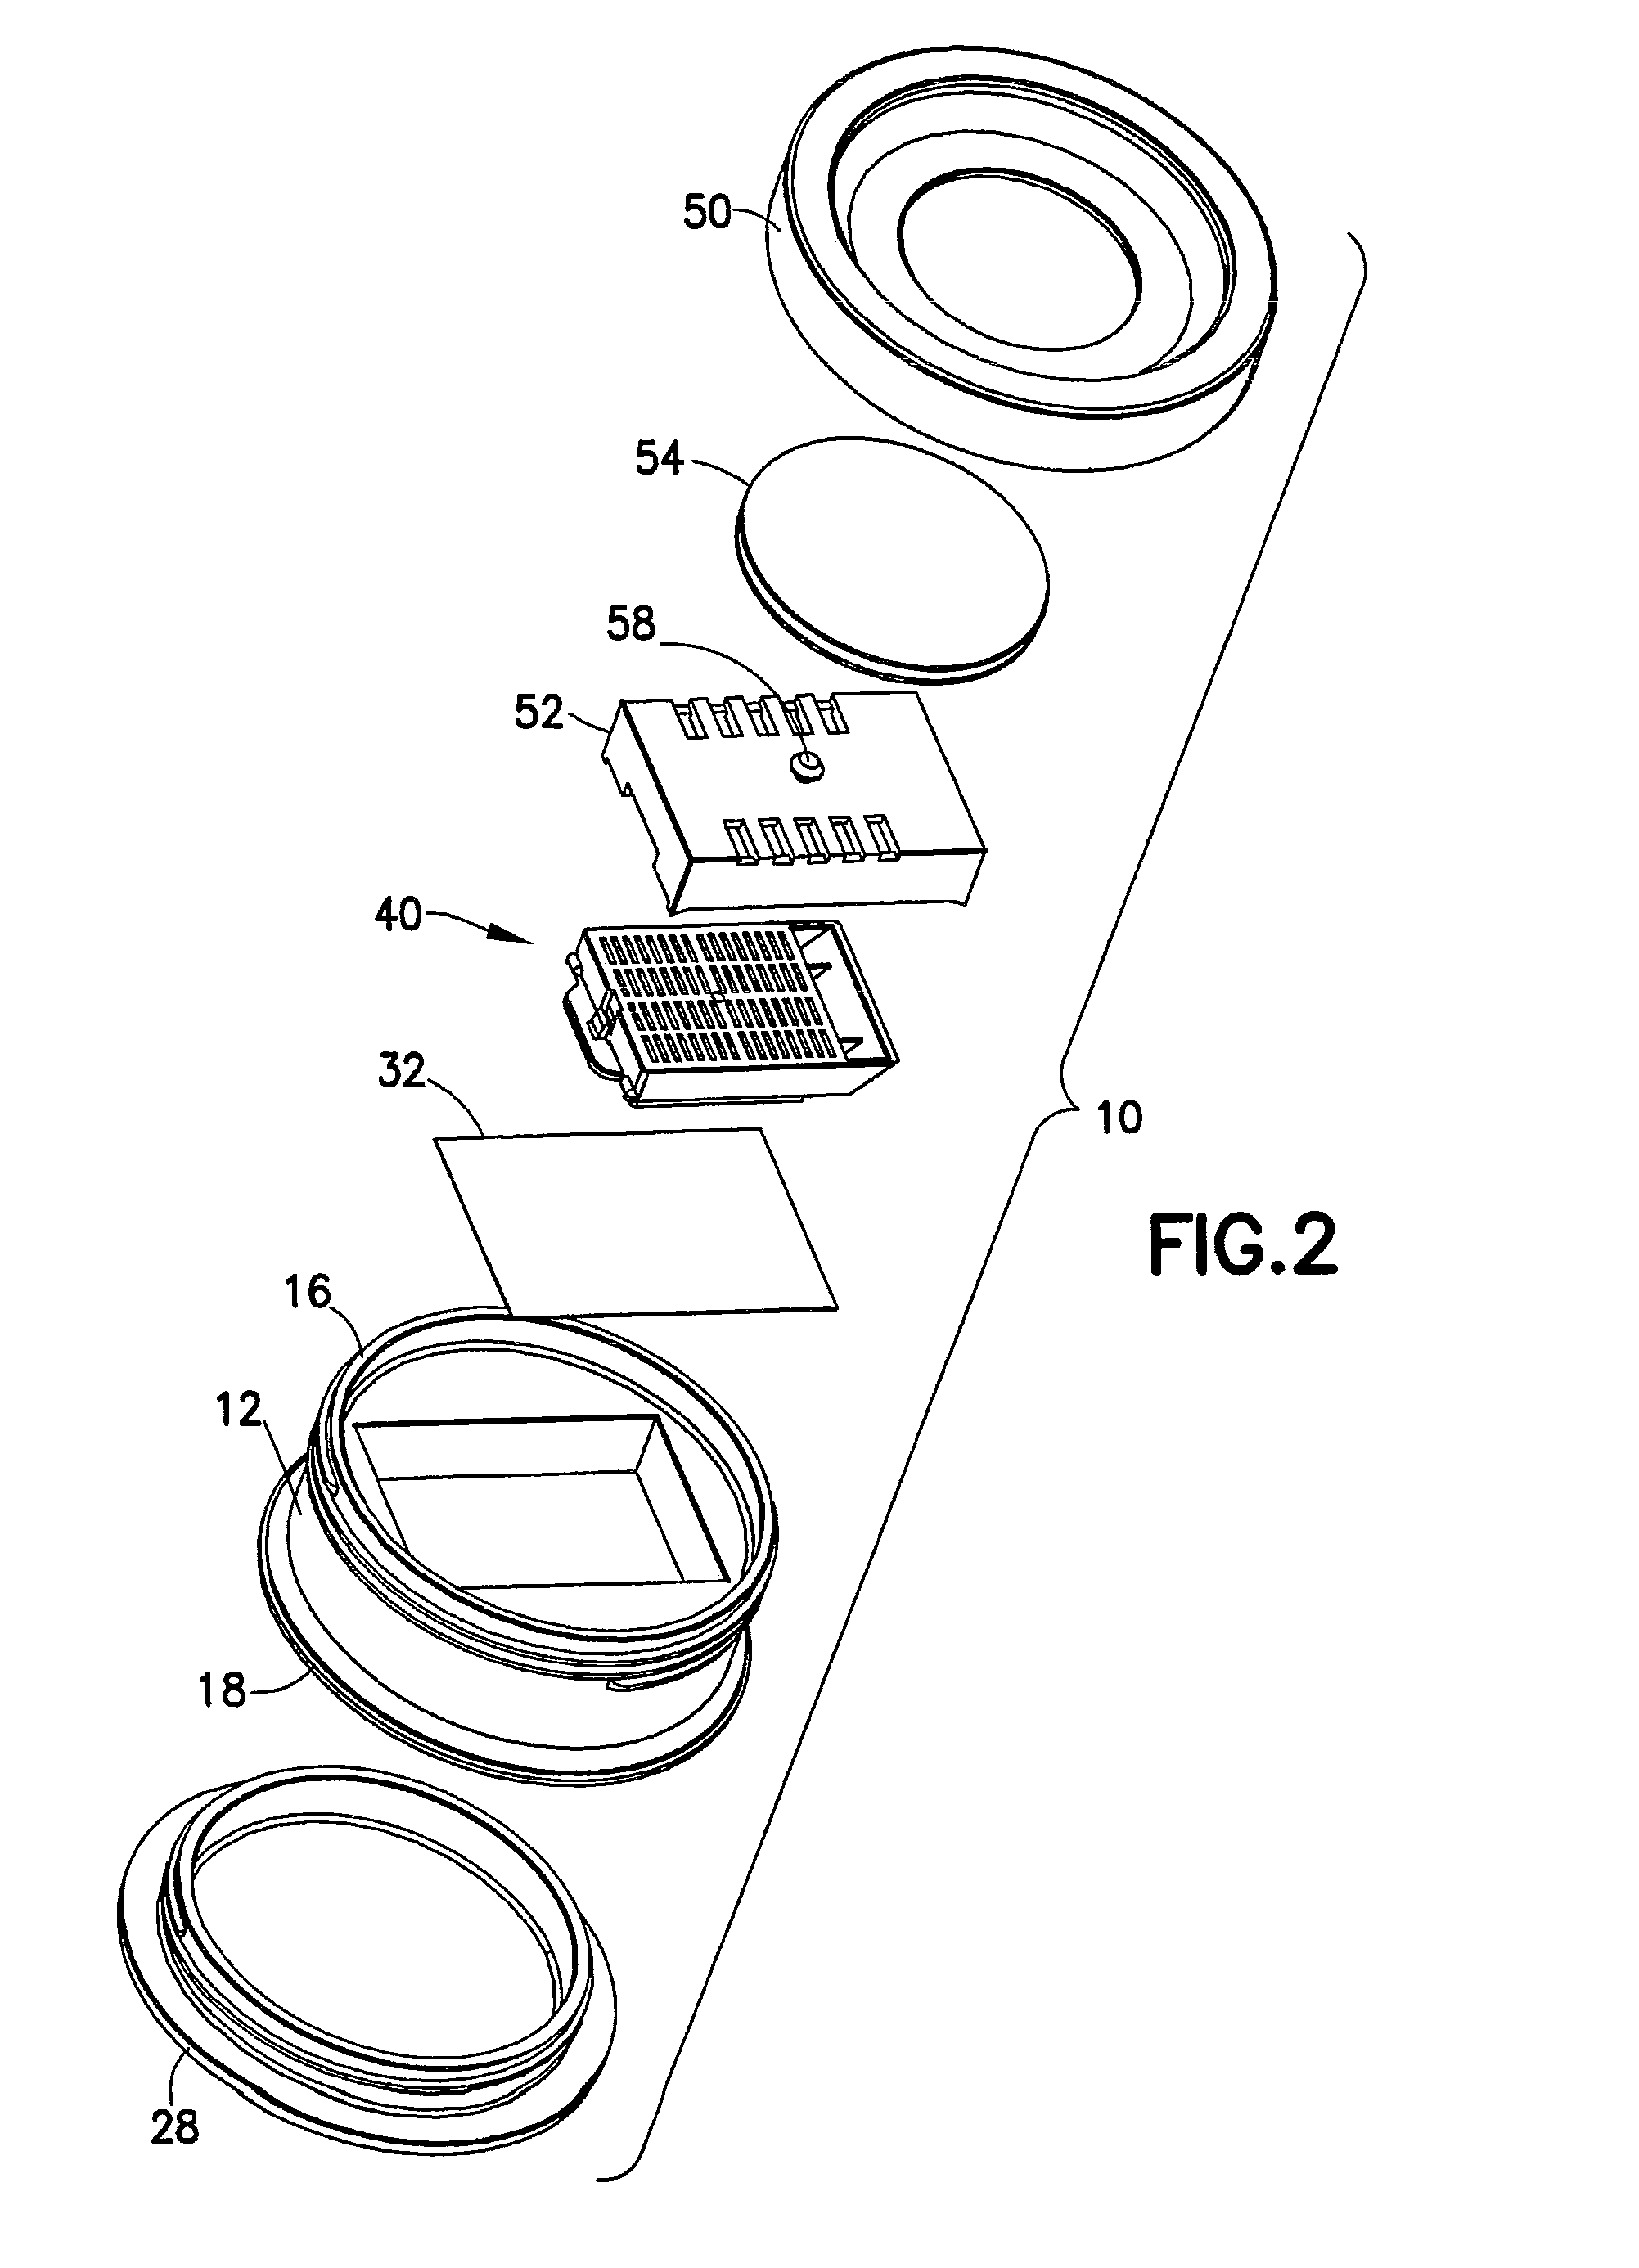 Tissue Container for Molecular and Histology Diagnostics Incorporating a Breakable Membrane